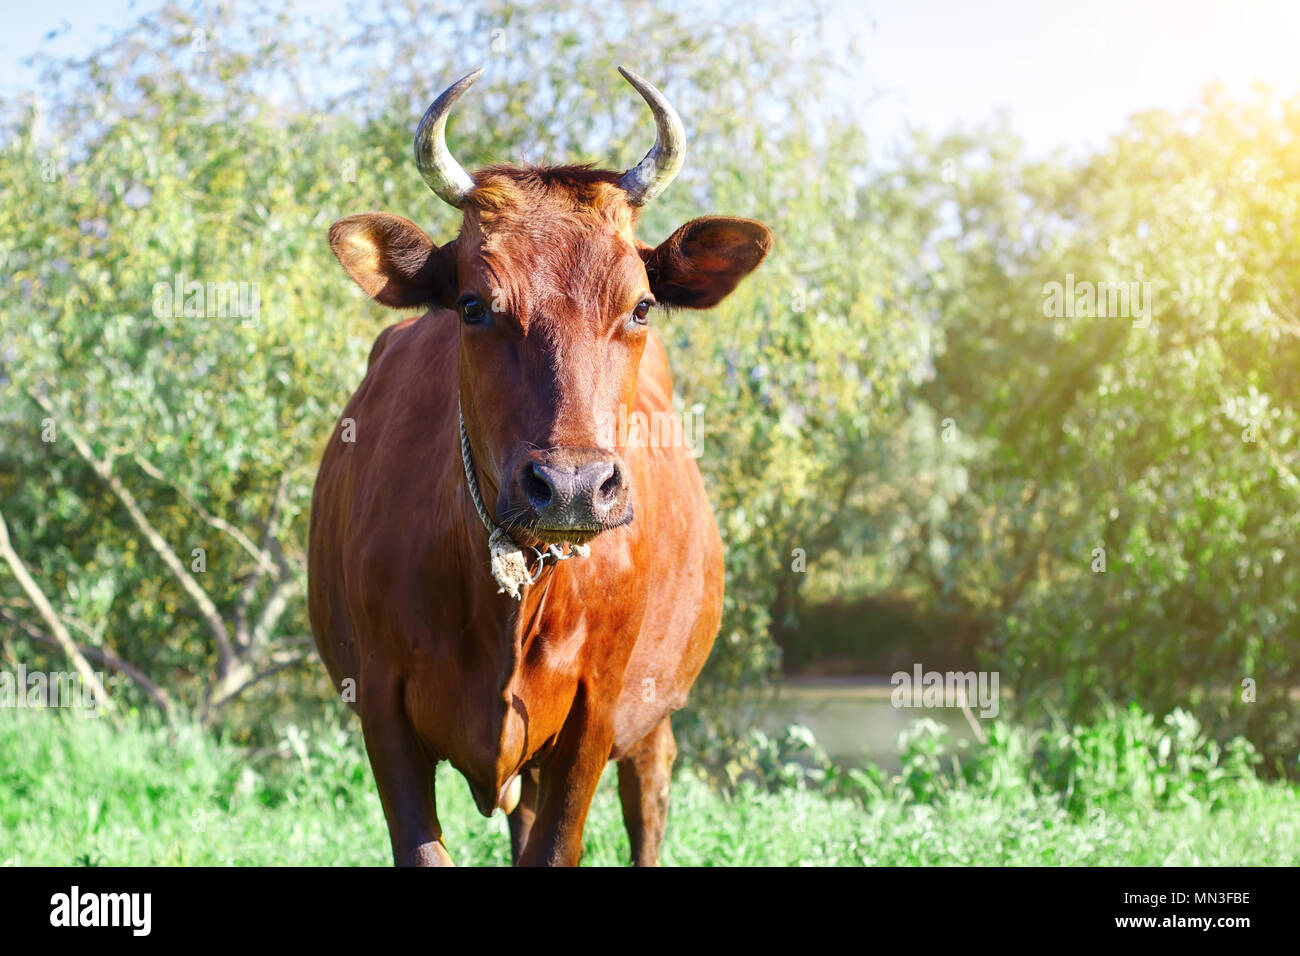 The cow is grazed on a pasture in the summer. Agriculture and livestock production. Stock Photo